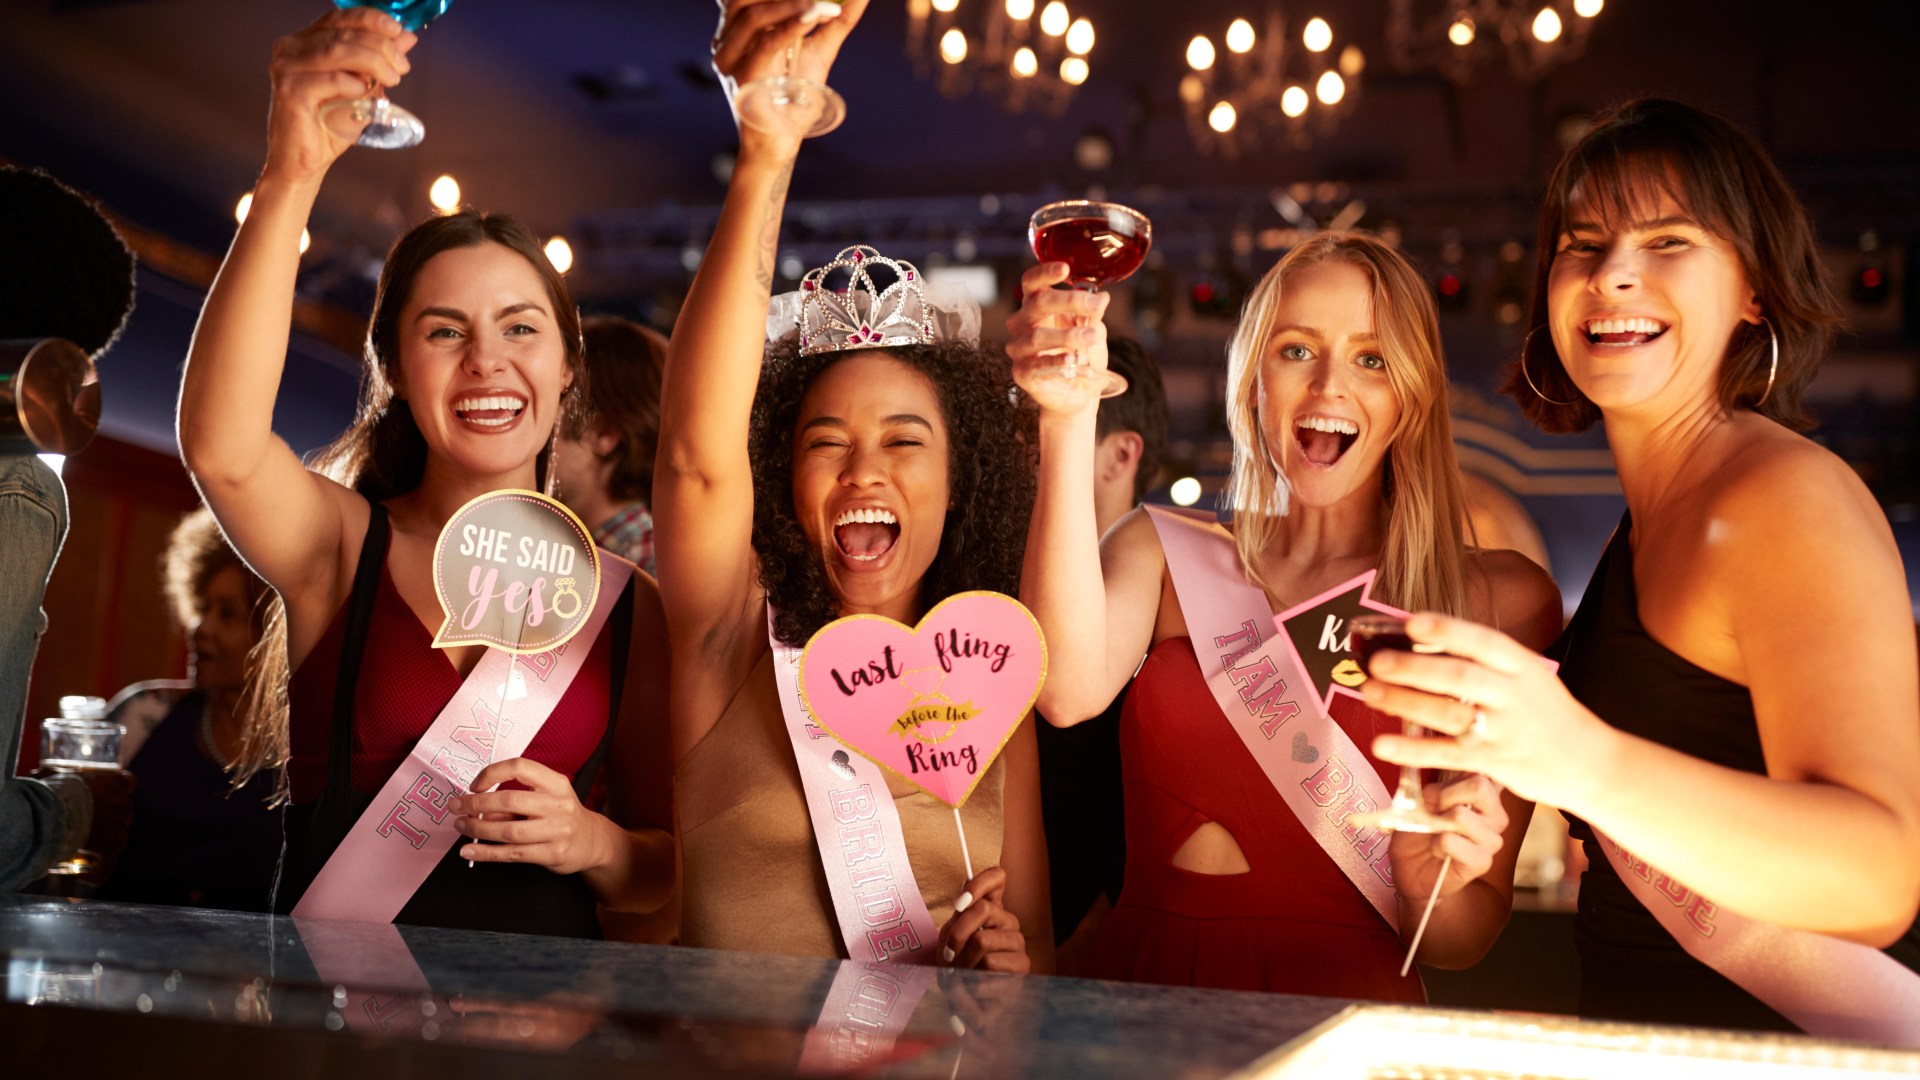 Four cheap ways to plan the perfect hen party and give the bride a night to remember [Video]